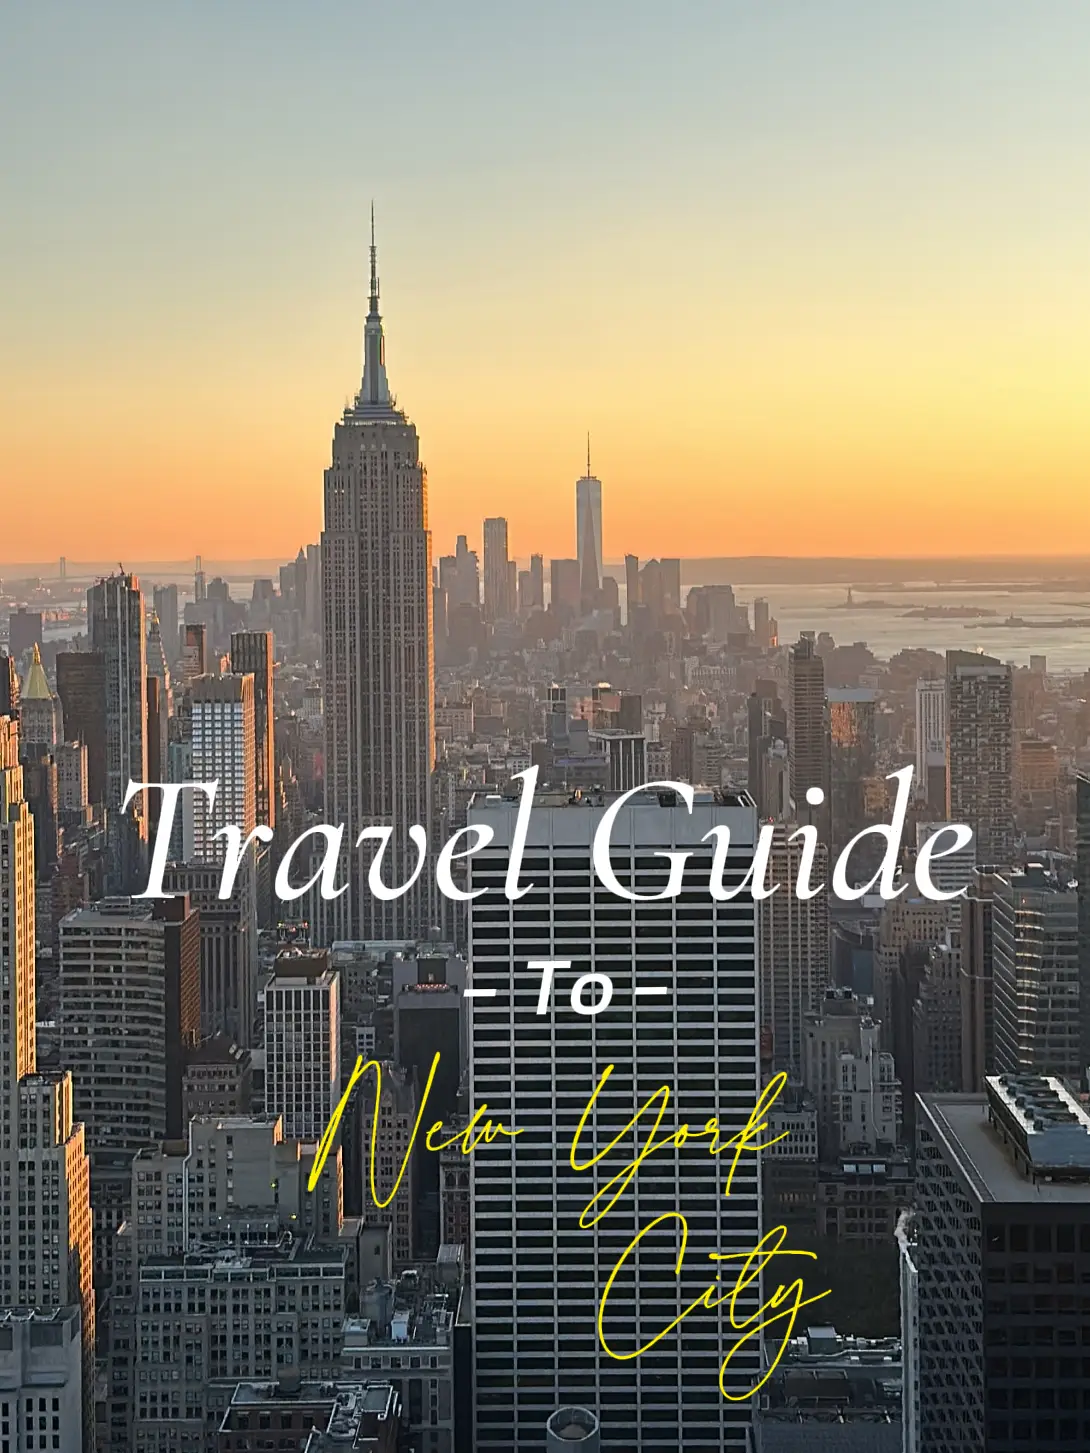  A city guide to New York.